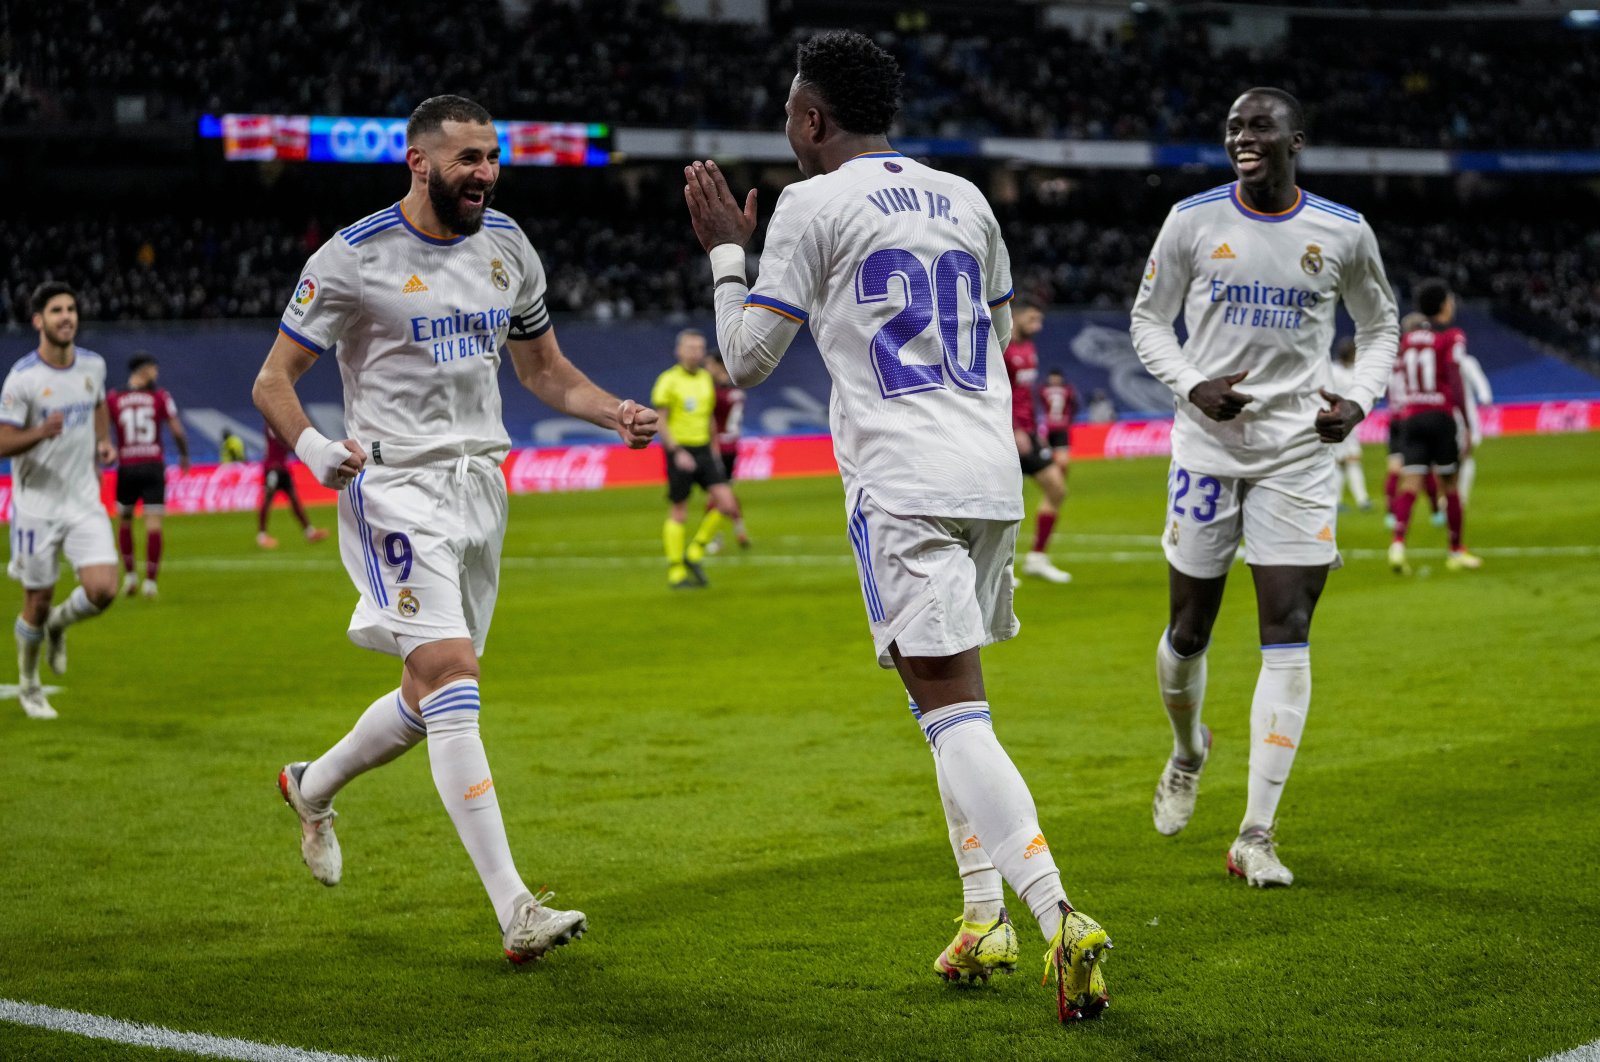 Real Madrid&#039;s Vinicius Junior (C) is congratulated by teammate Karim Benzema (L) after scoring a goal in La Liga match against Valencia, Madrid, Spain, Jan. 8, 2022. (AP Photo)